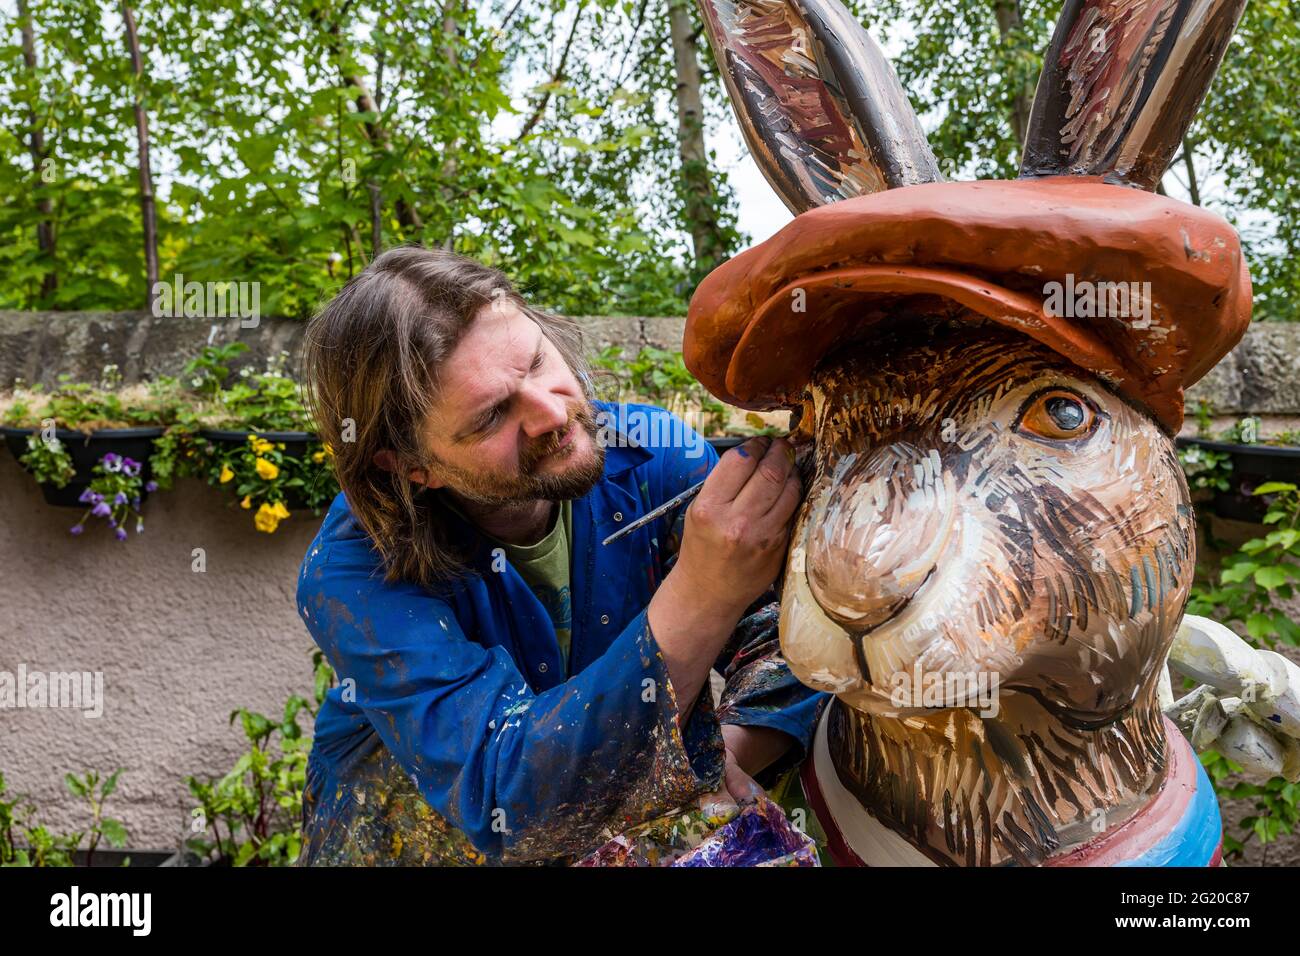 Artist Chris Rutterford paints a humorous giant fibreglass hare sculpture in his outdoor studio for a charity art trail, Scotland, UK Stock Photo